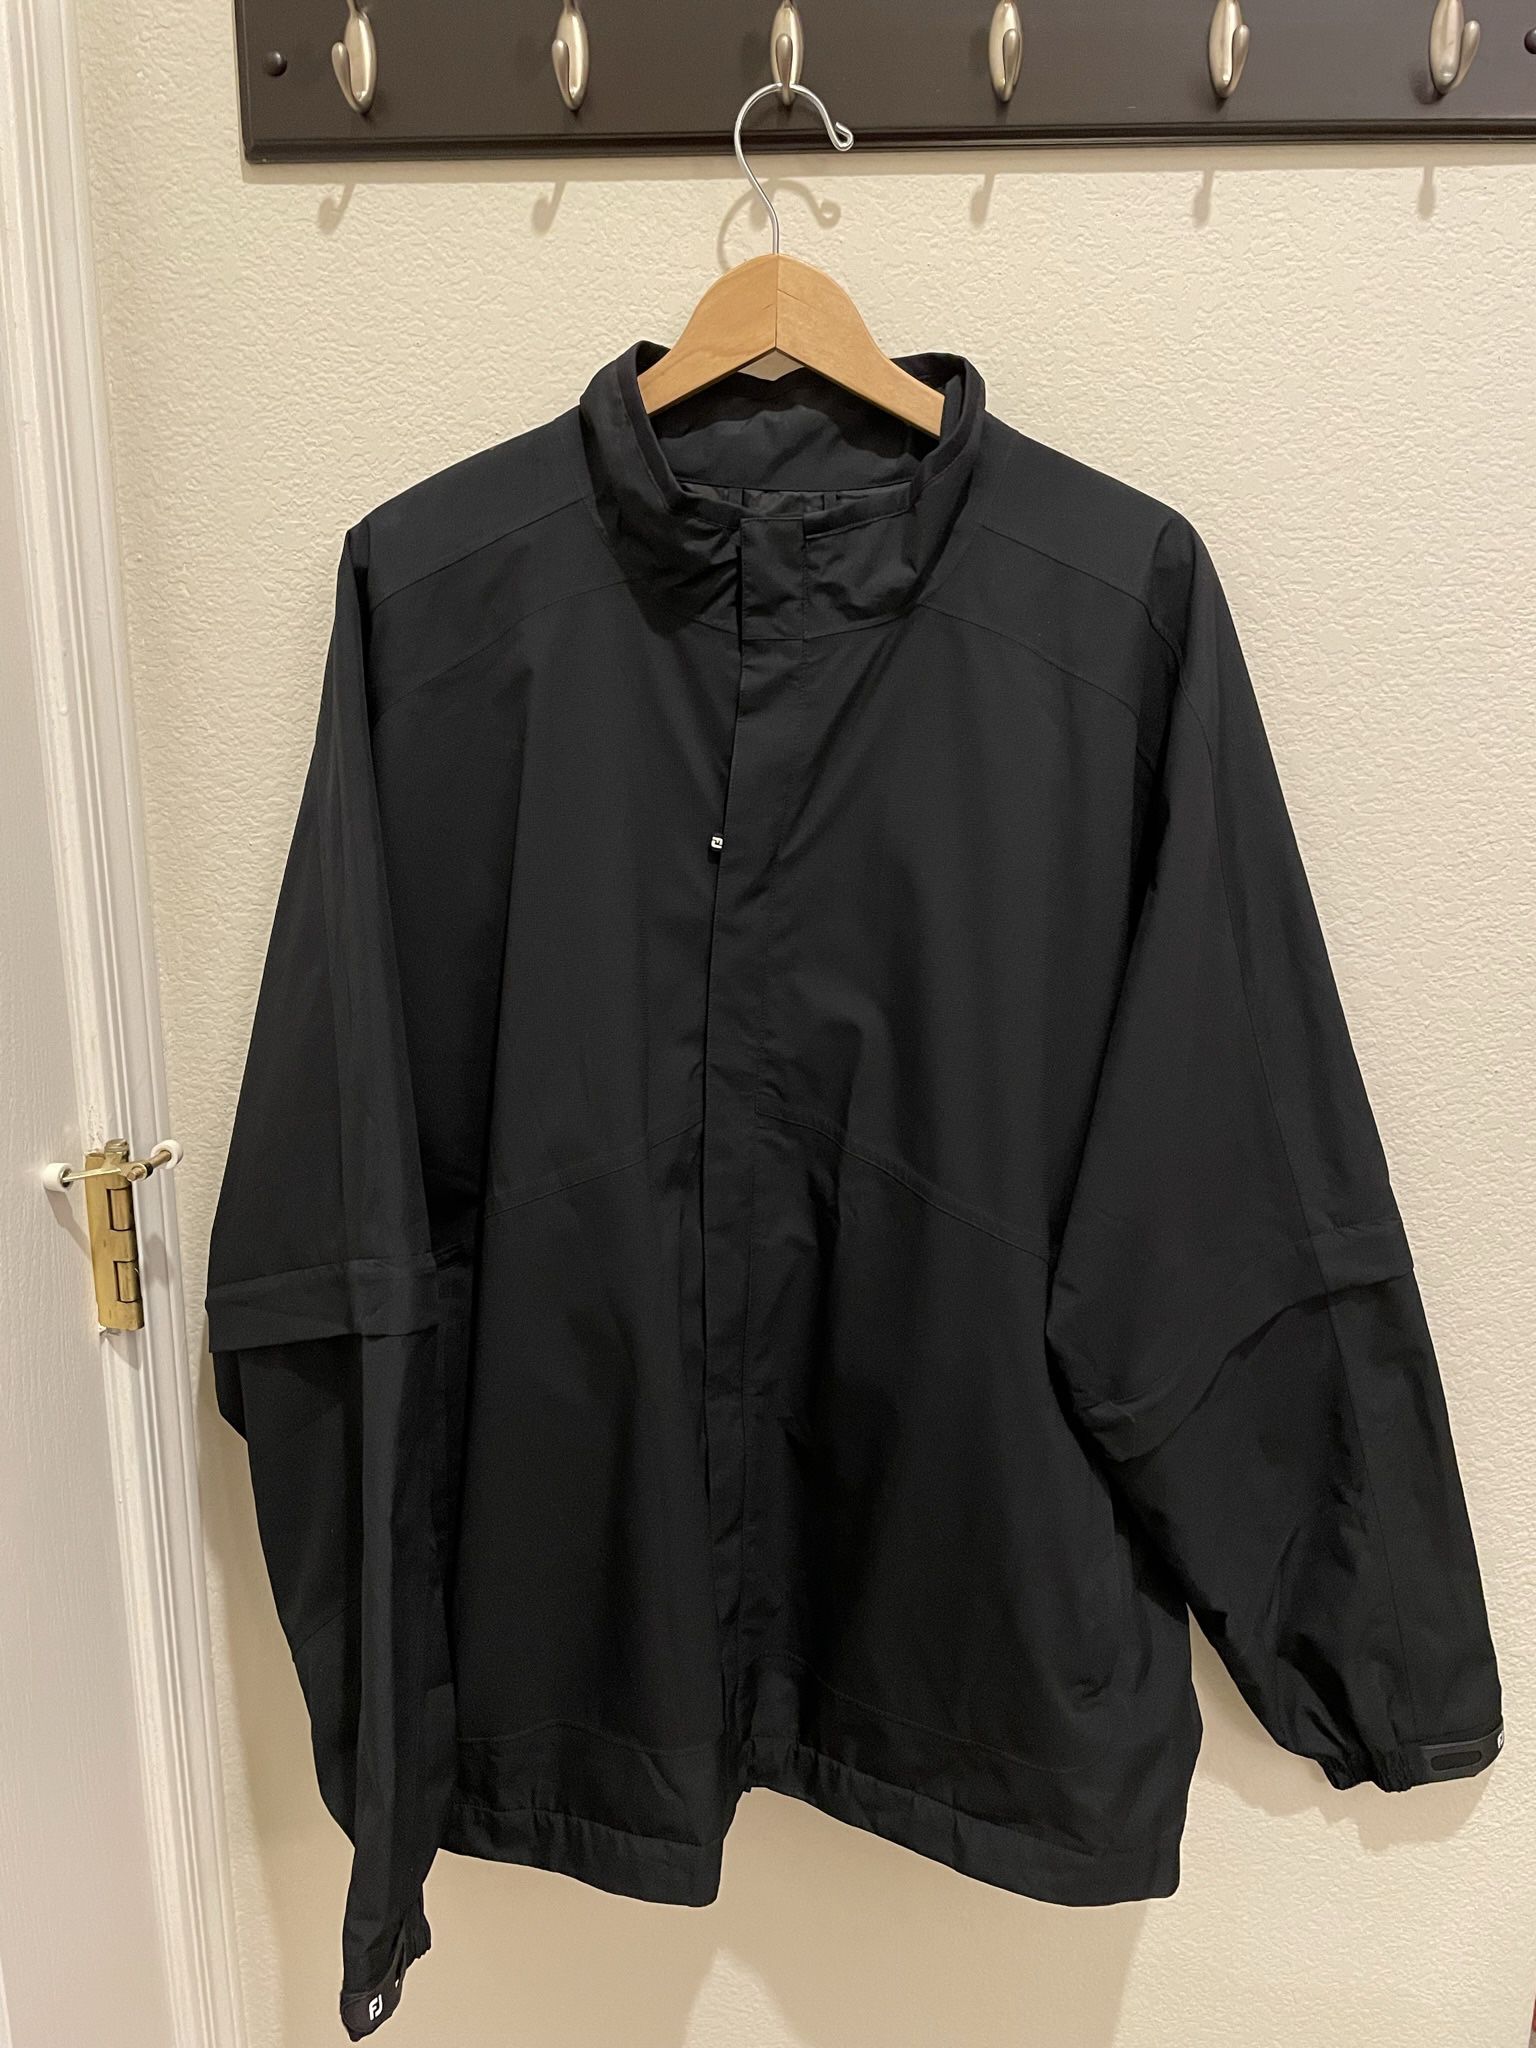 Gucci Tracksuit for Sale in Las Vegas, NV - OfferUp